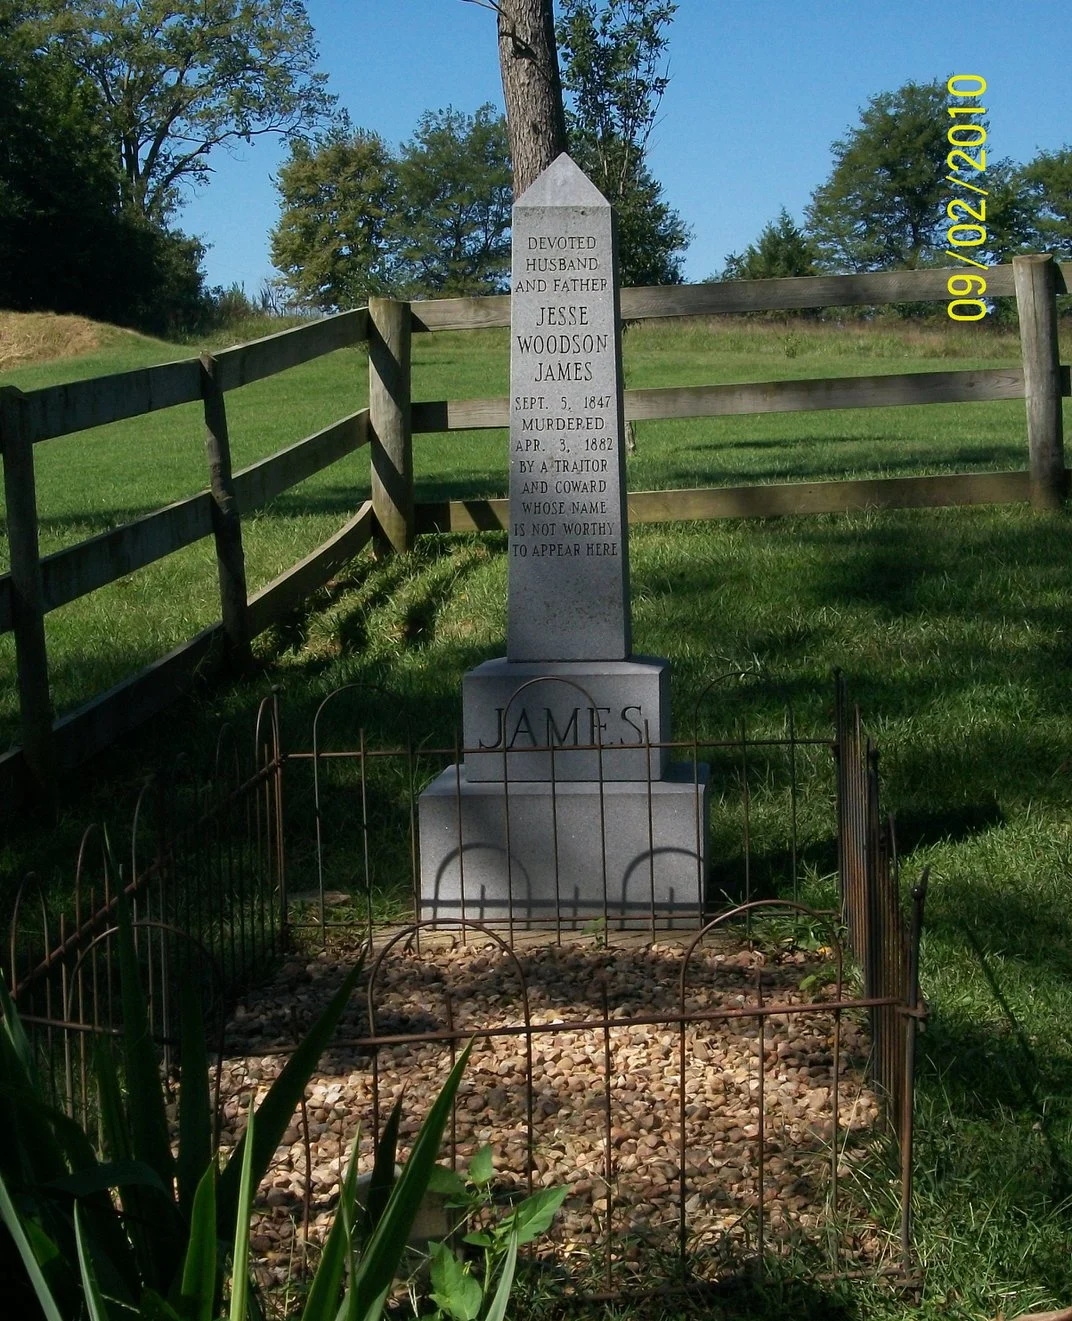 A picture of a grave which engraves: Devoted husband and father Jesse Woodson James Sept. 5, 1847, Murdered Apr. 3, 1882 by a traitor and coward whose name is not worthy to appear here. James